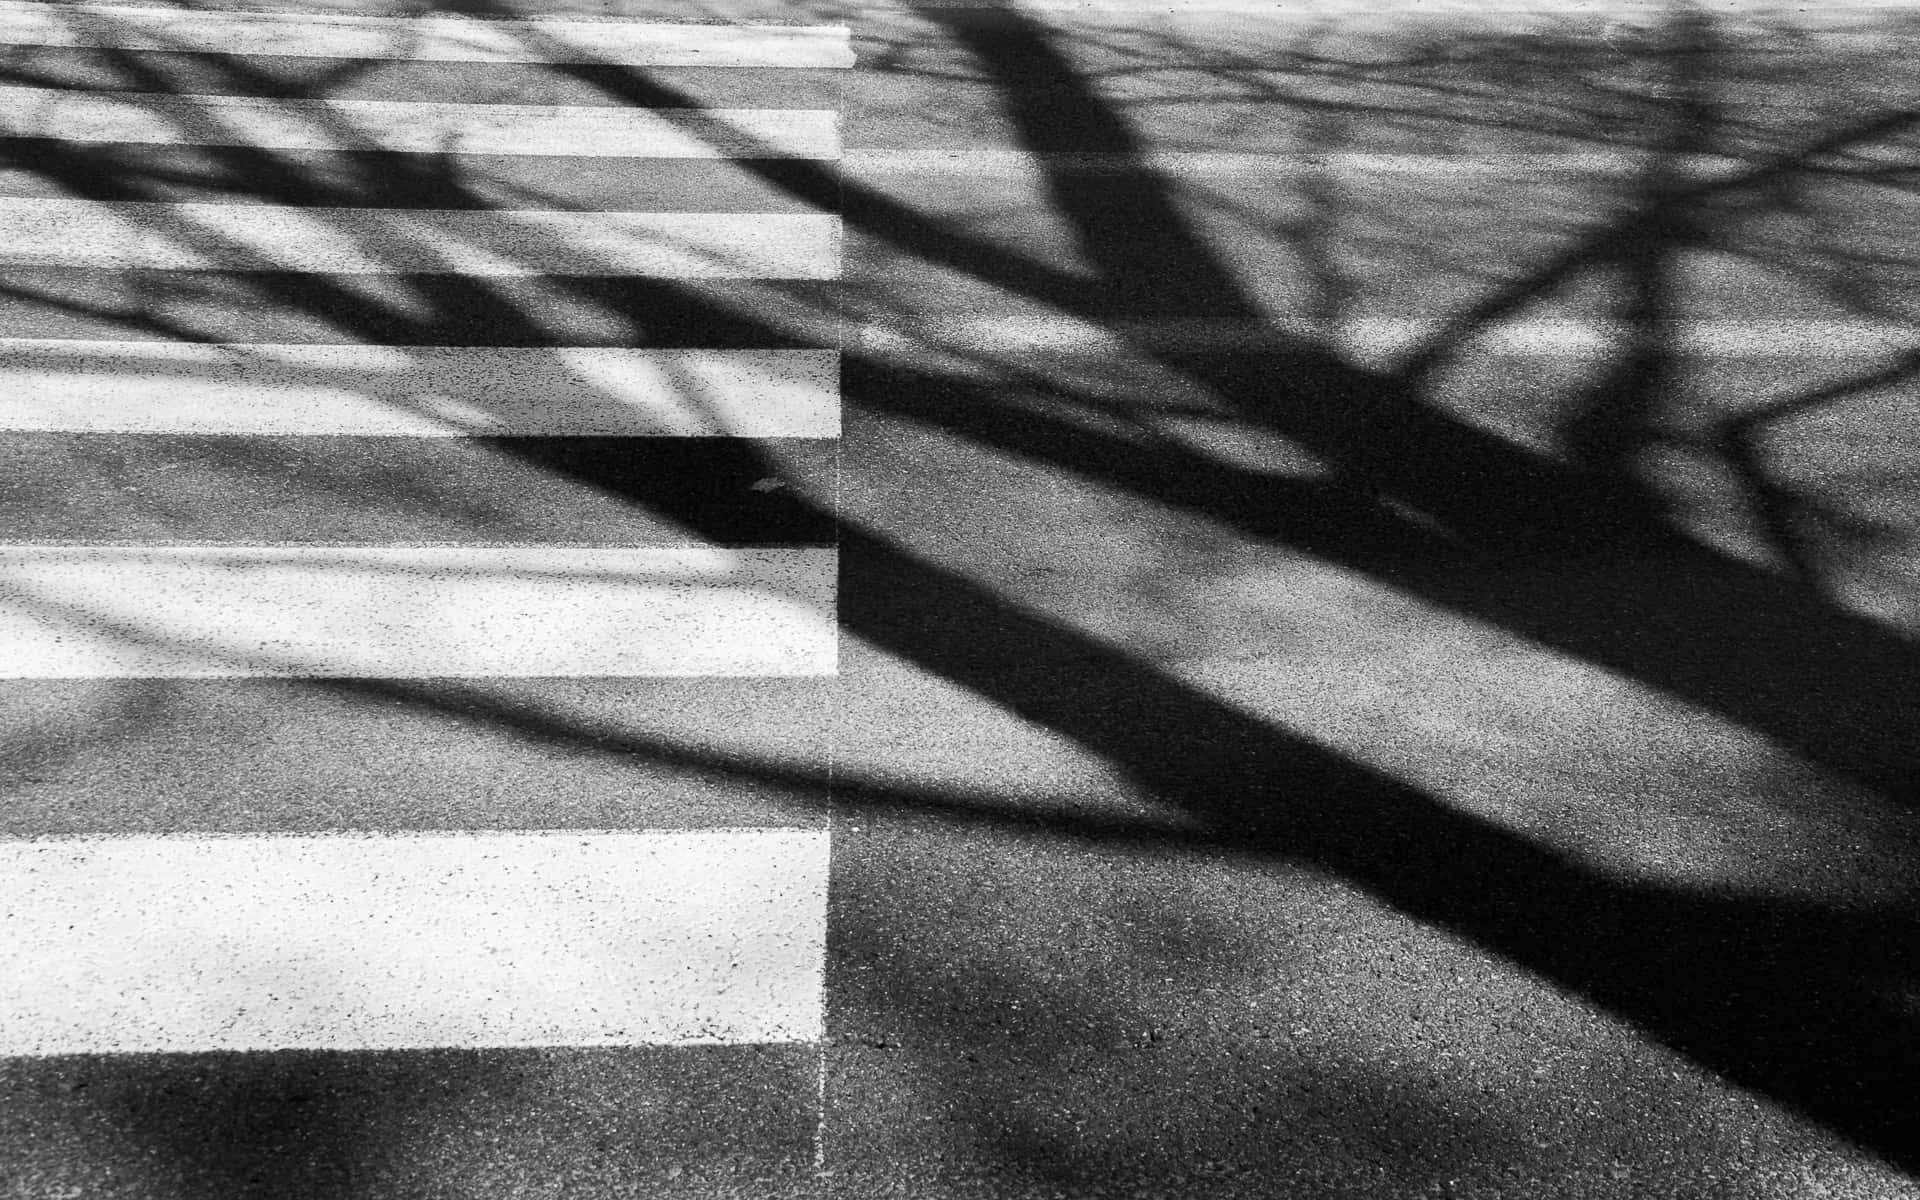 2017. Geometry, part II. Pedestrian crossing and the shadow of the tree. Warsaw street photography.